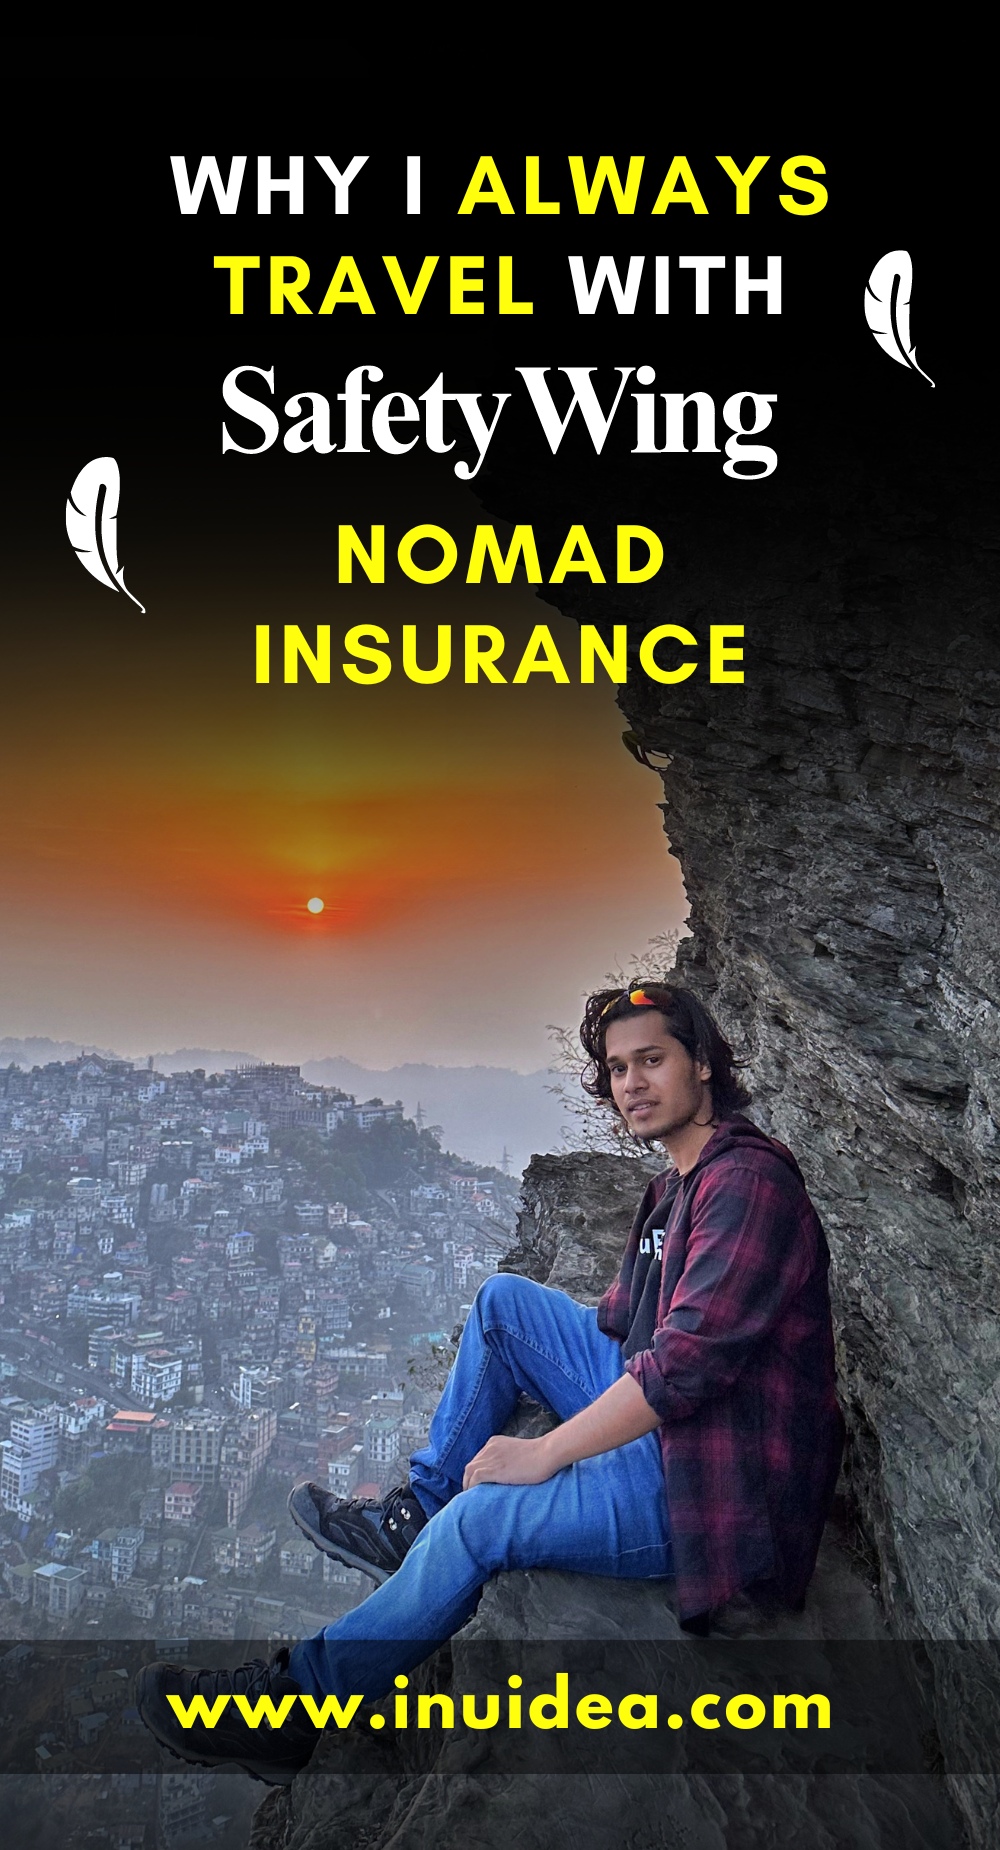 Why I Always Travel with SafetyWing Nomad Insurance: Peace of Mind for Every Adventure